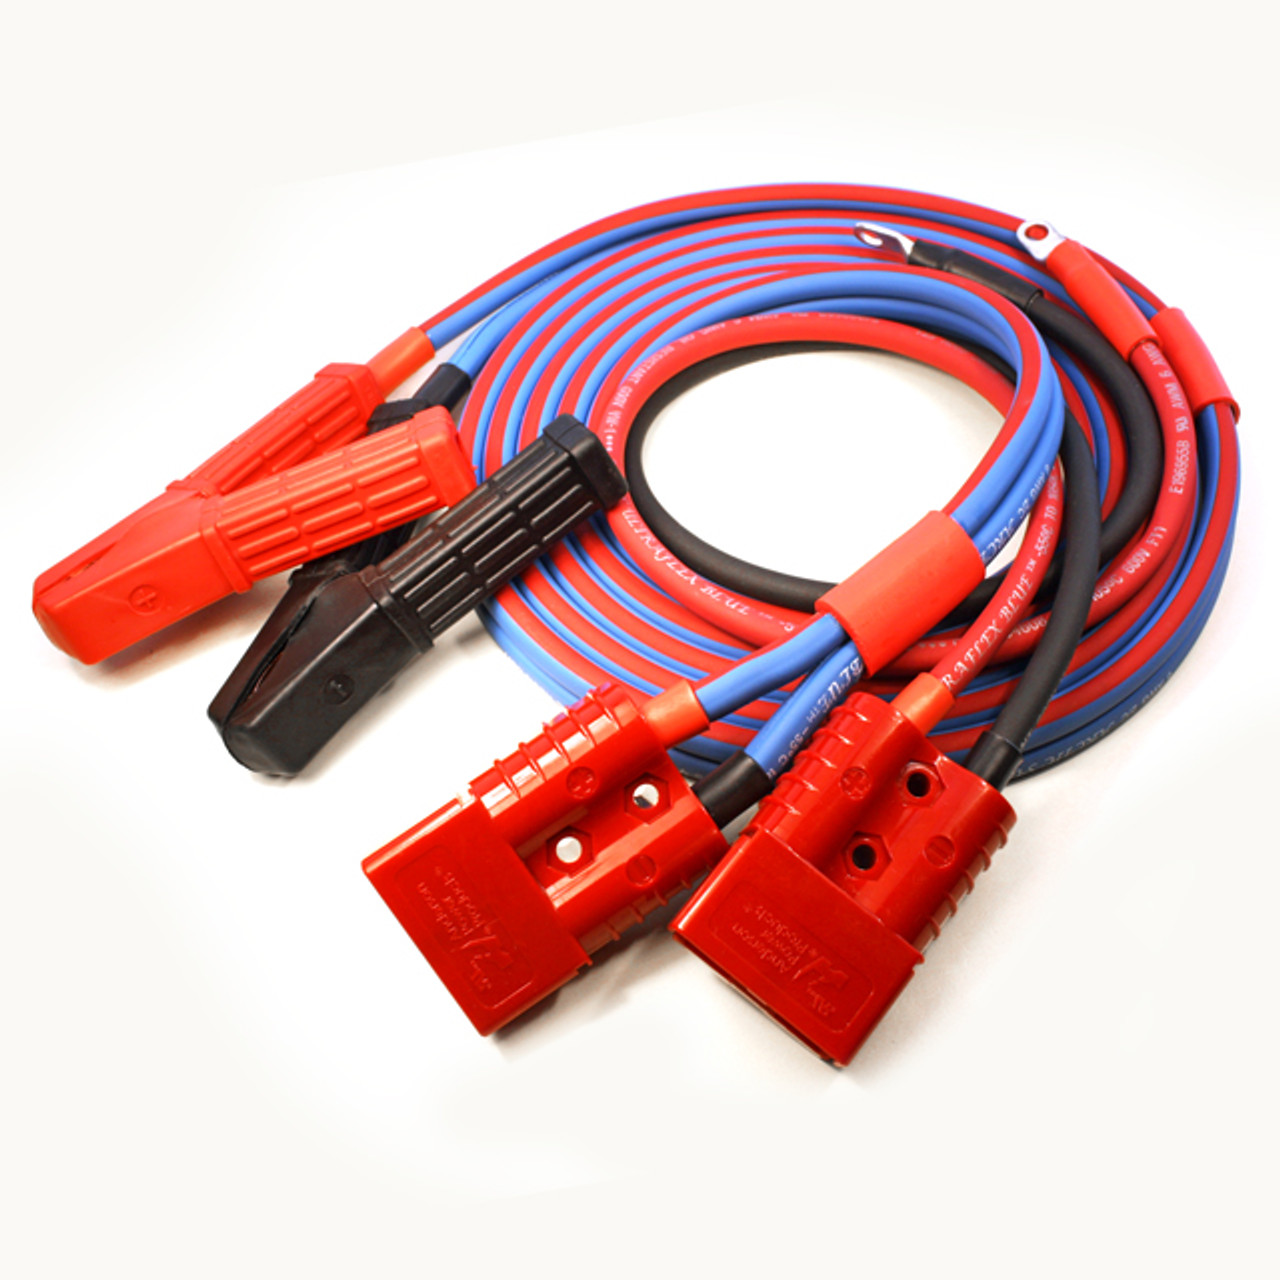 ATV UTV jumper cables are sized for the smaller batteries in ATVs, UTVs, motorcycles, personal watercraft, mowers, scooters, golf carts, farm equipment, etc.